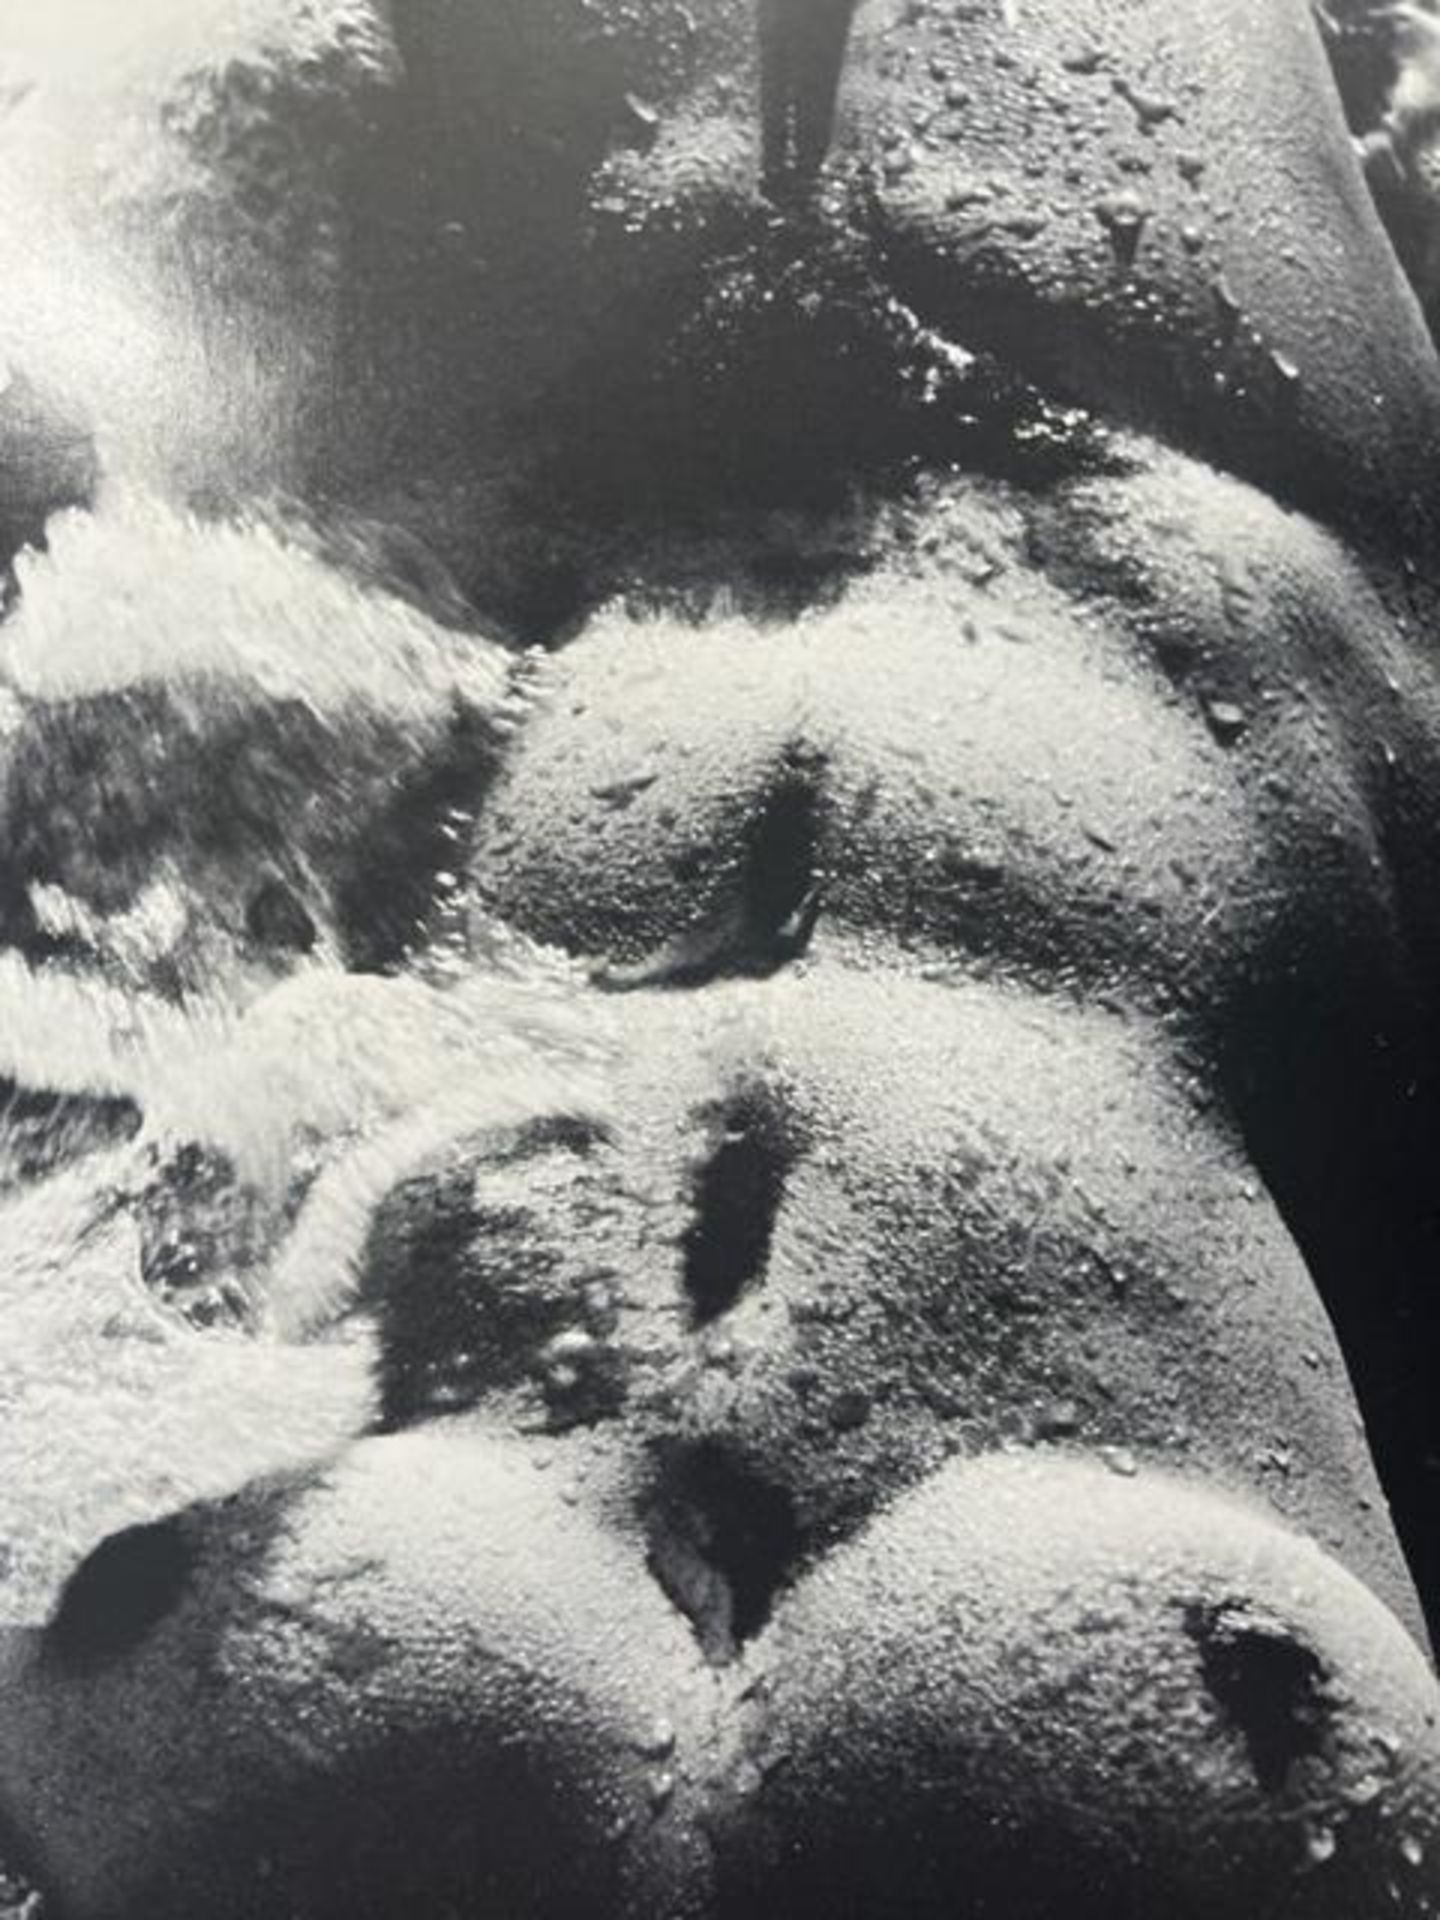 Lucien Clergue "Untitled" - Image 2 of 6